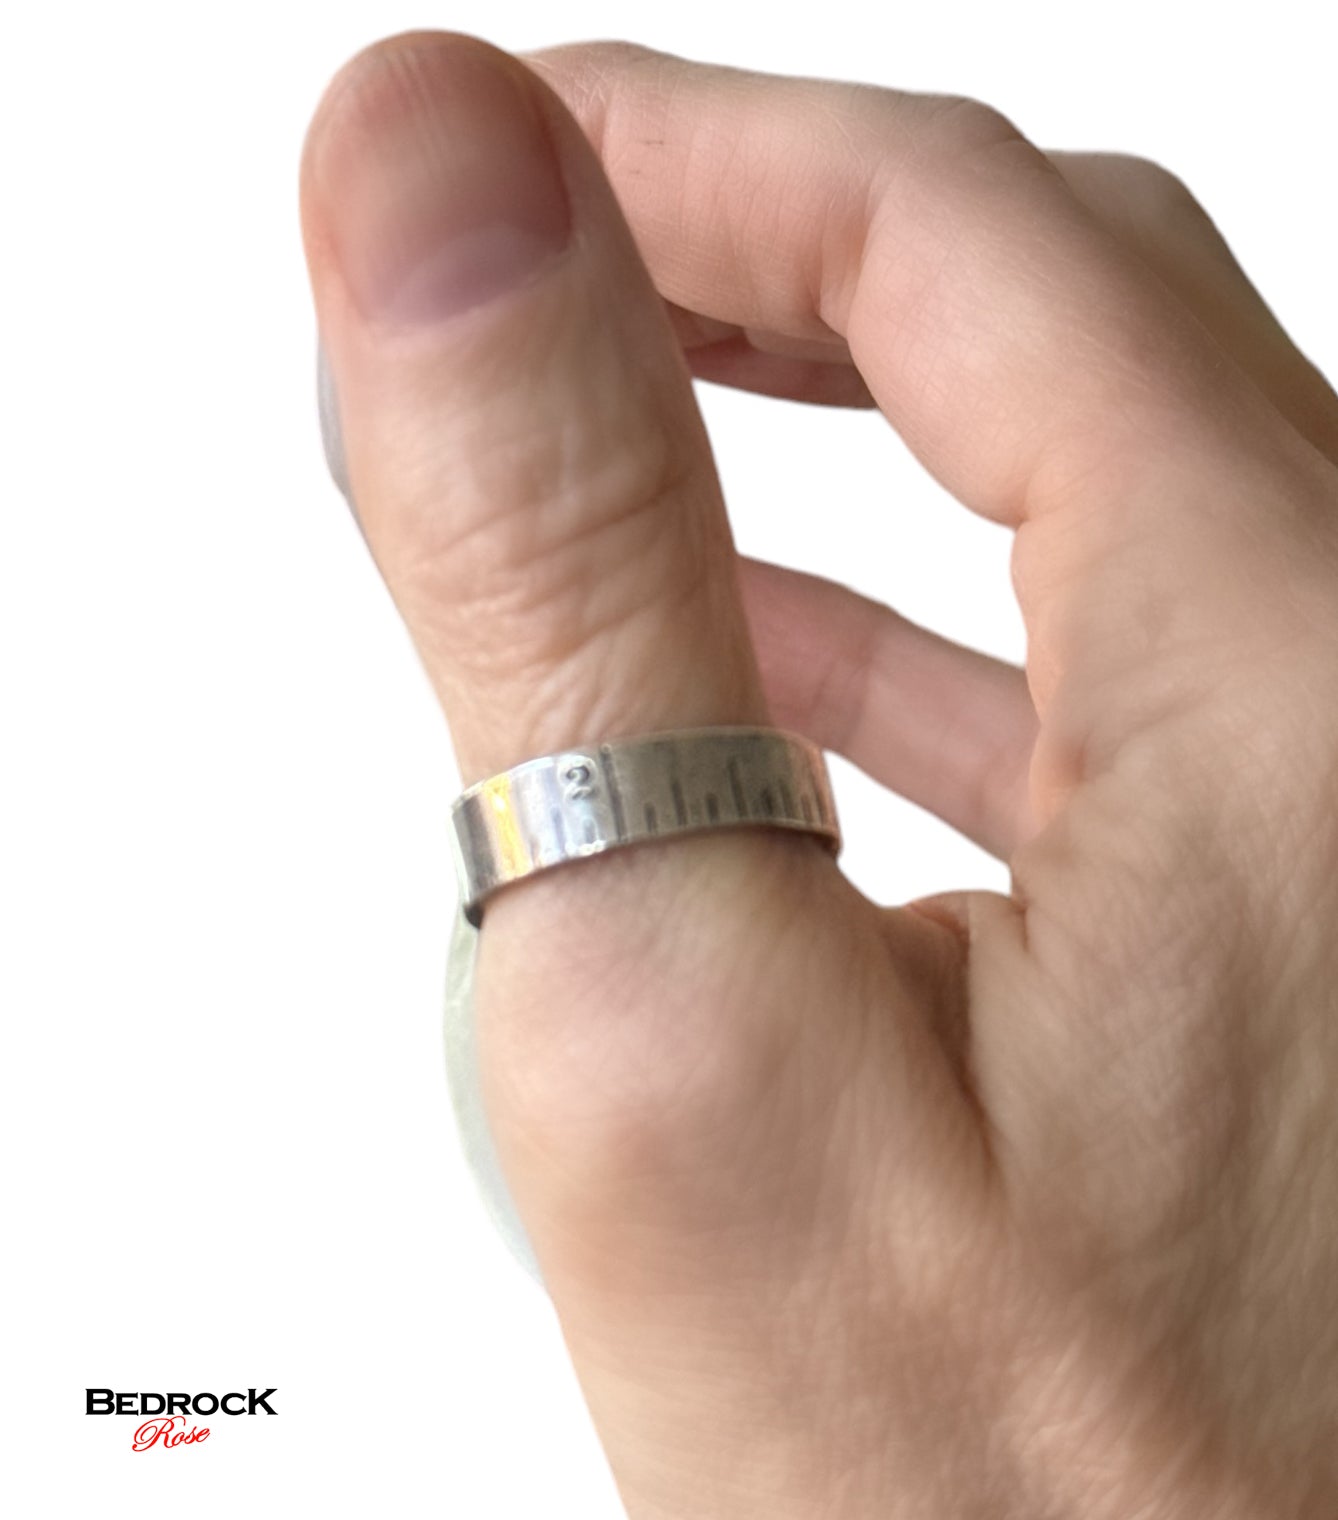 Sterling Silver Ring featuring a true-sized ruler in inches.